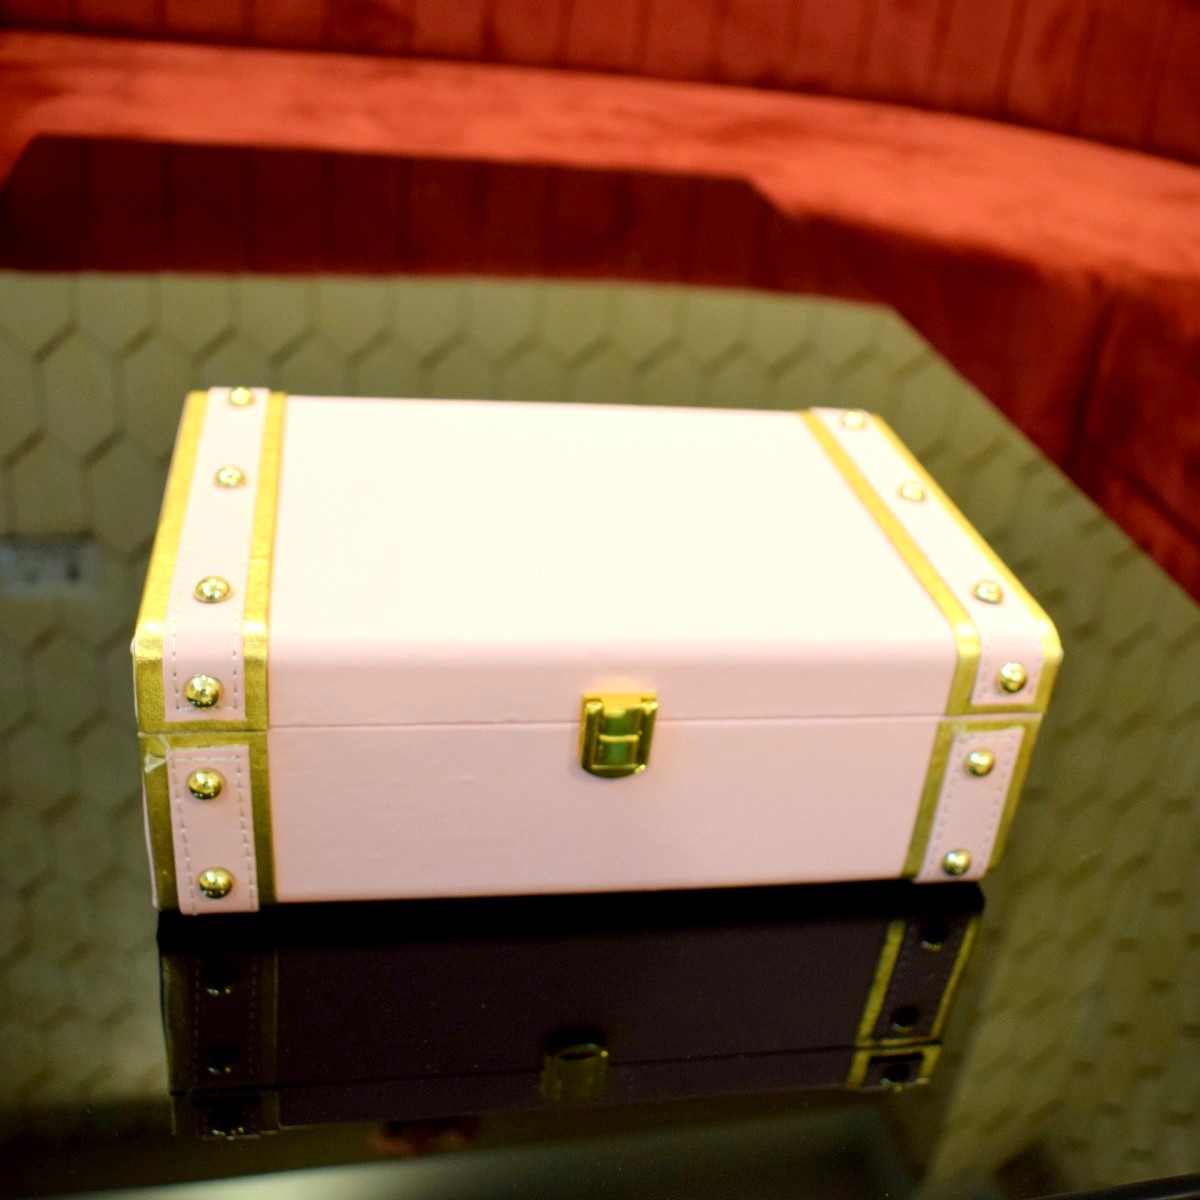 Decorating with vintage Louis Vuitton trunks